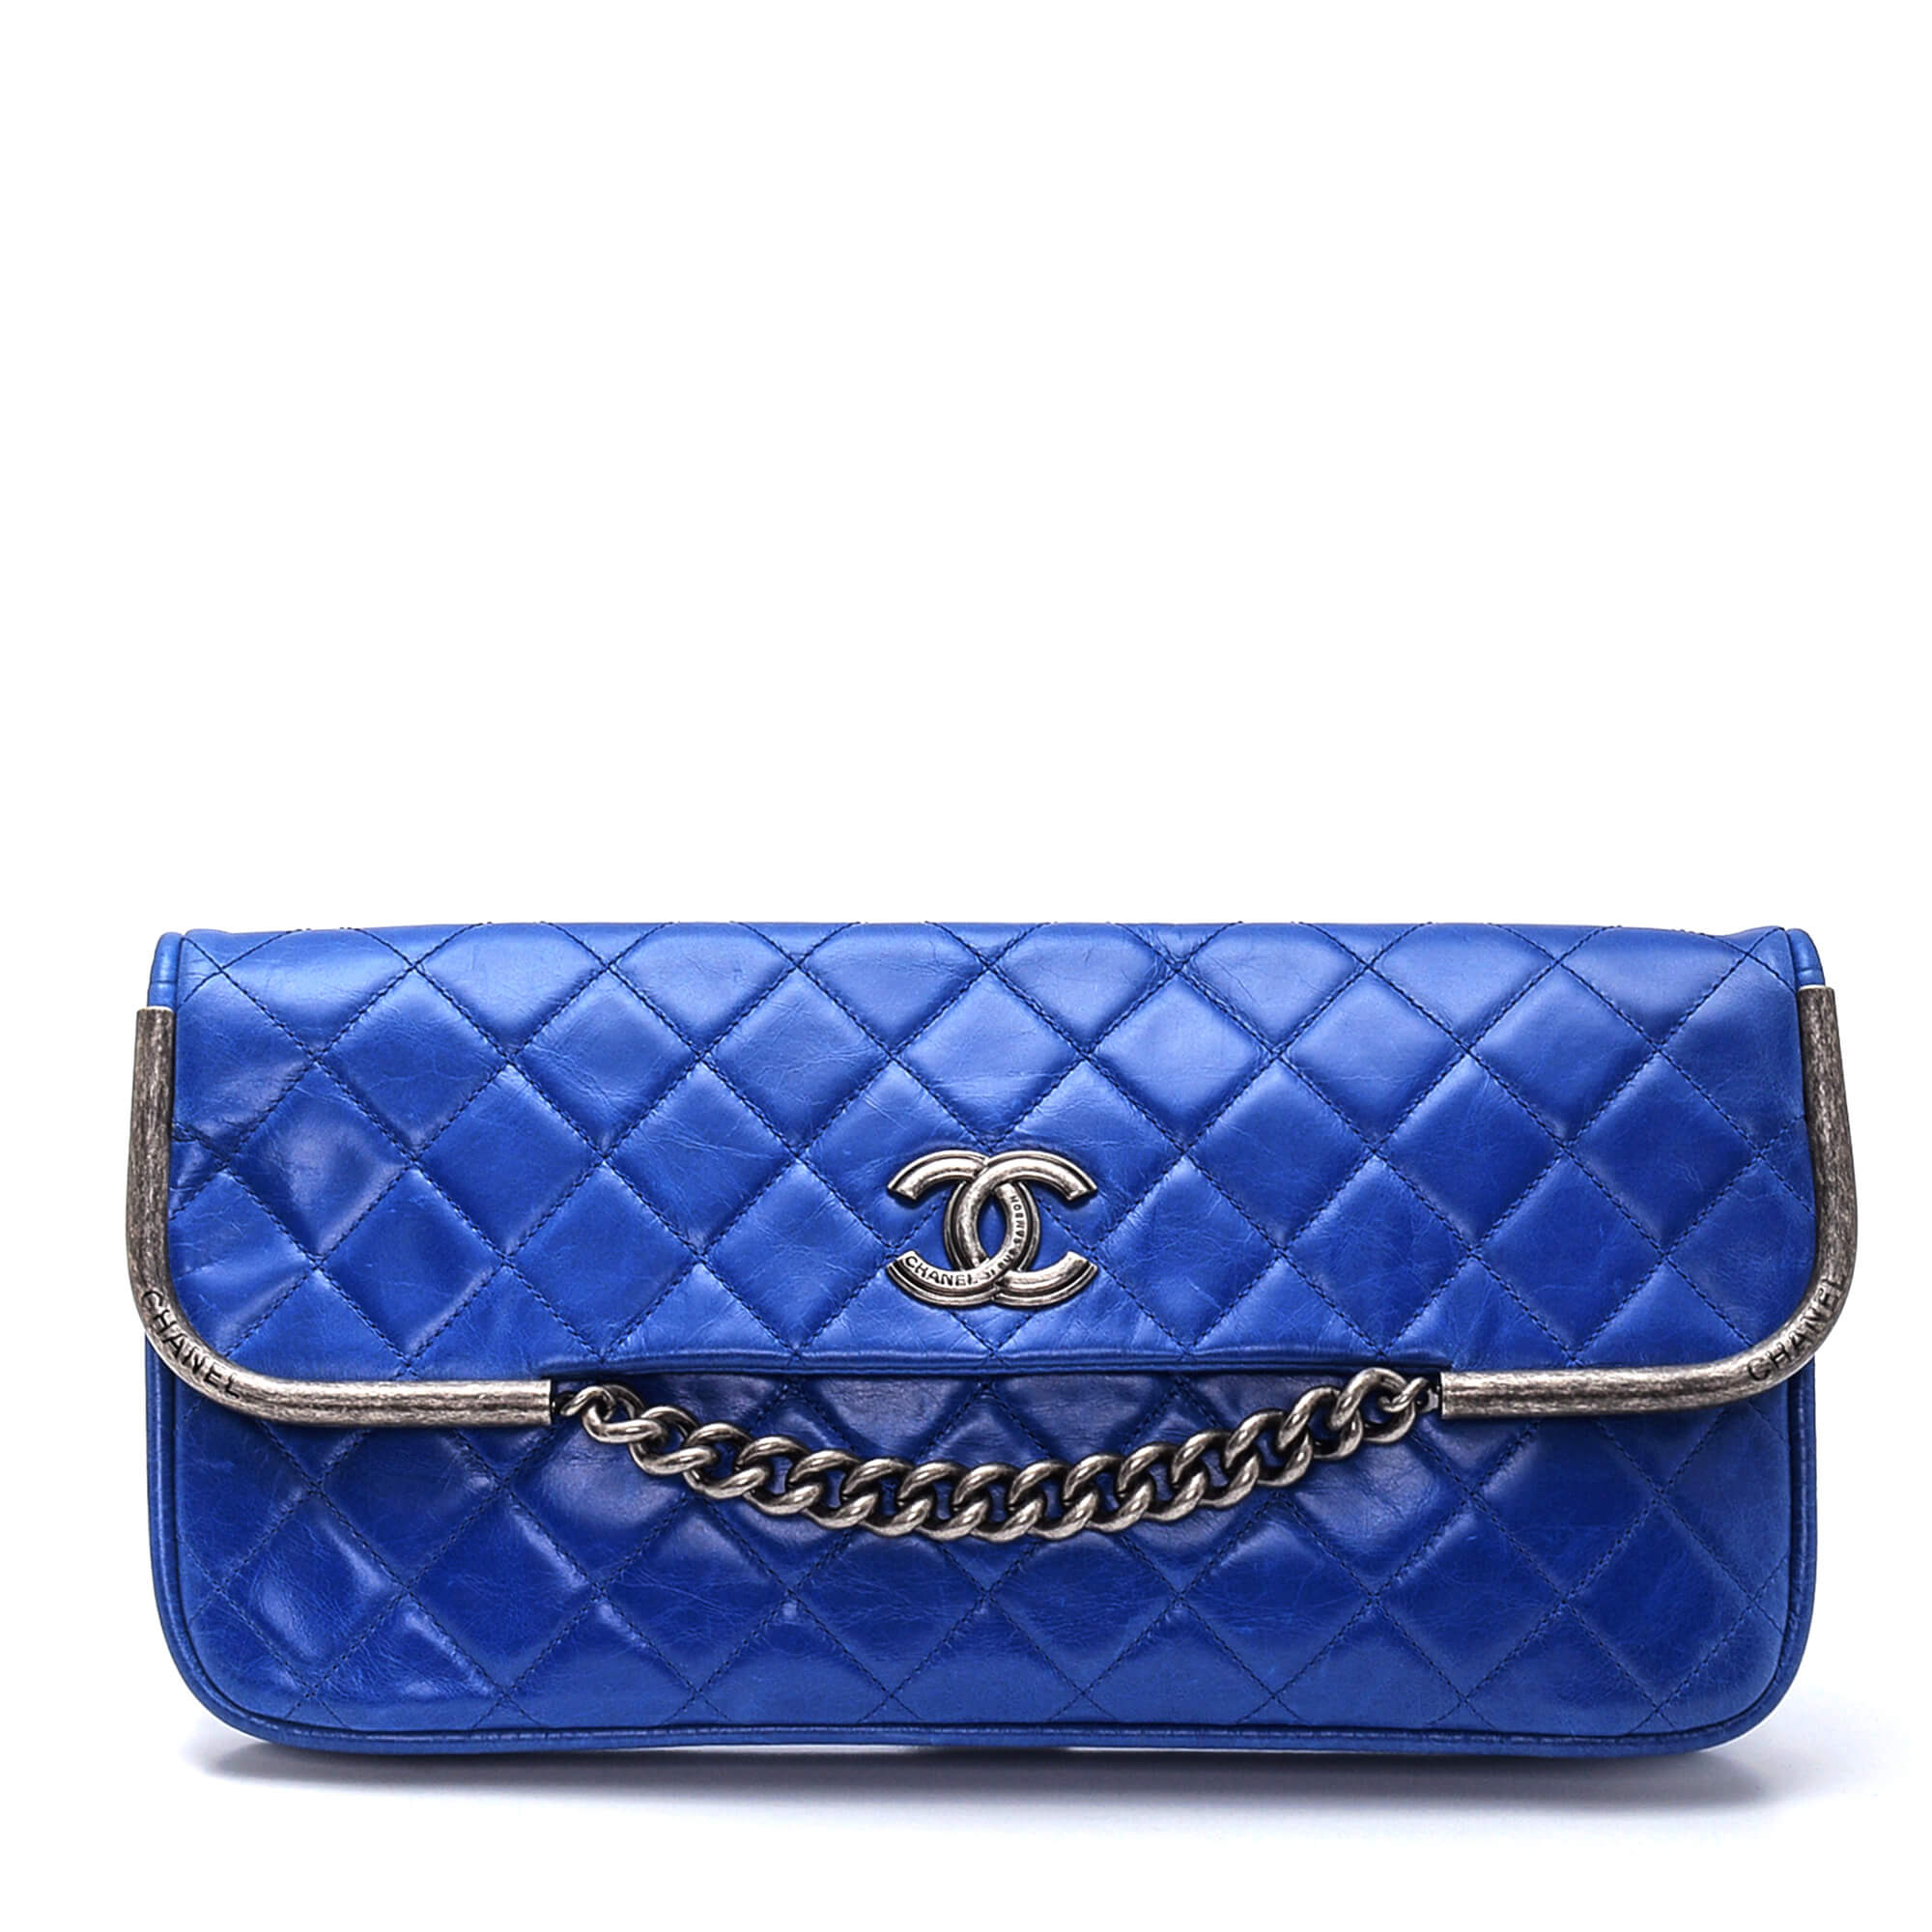 Chanel - Royal Blue Quilted Chain Clutch